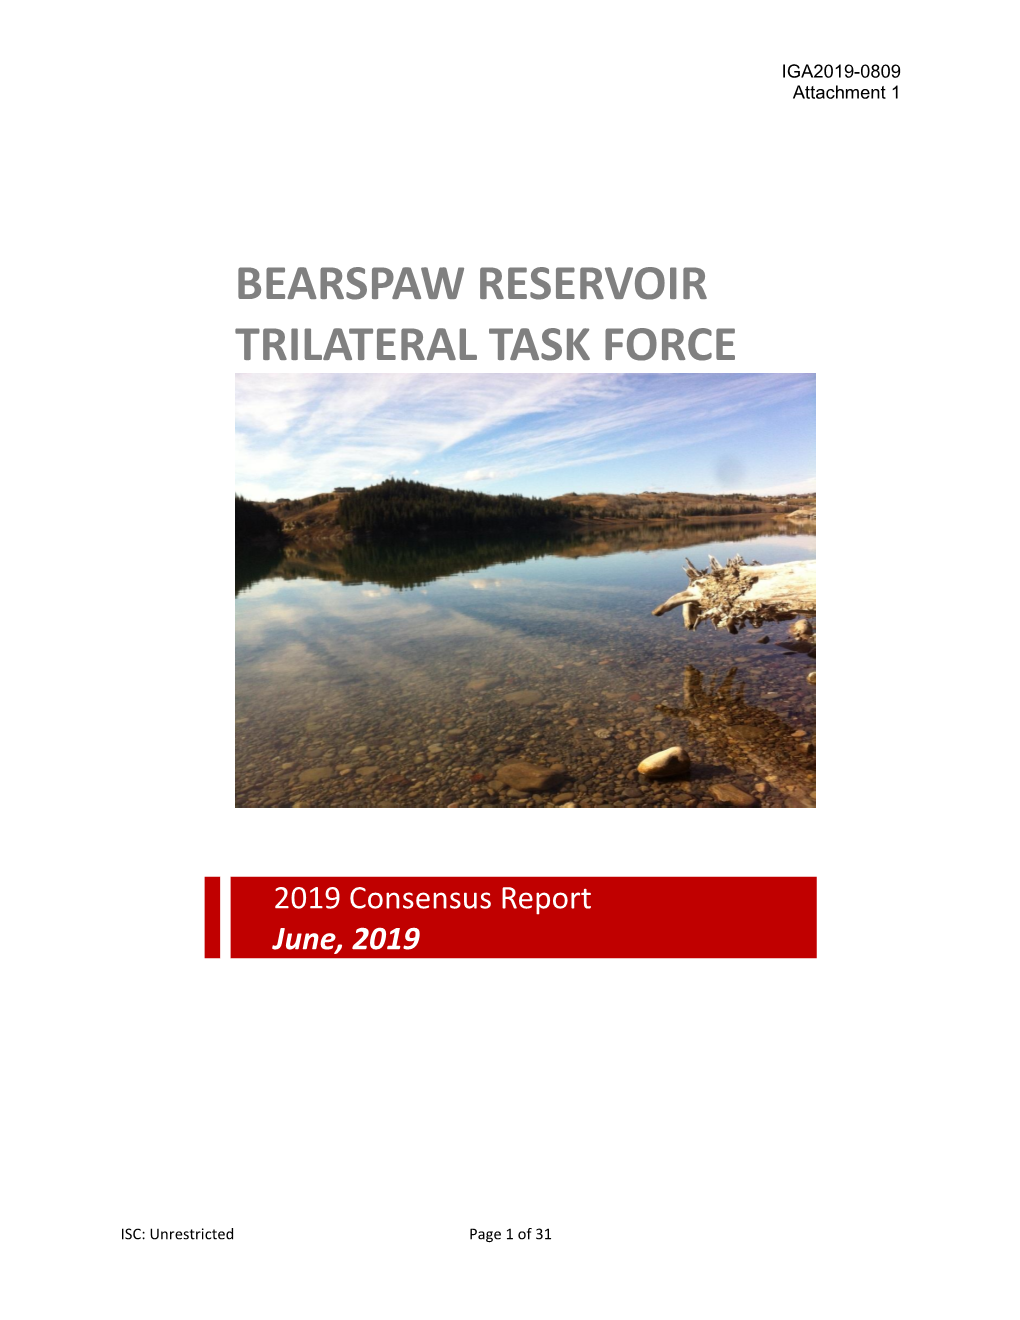 Bearspaw Reservoir Trilateral Task Force Consensus Report